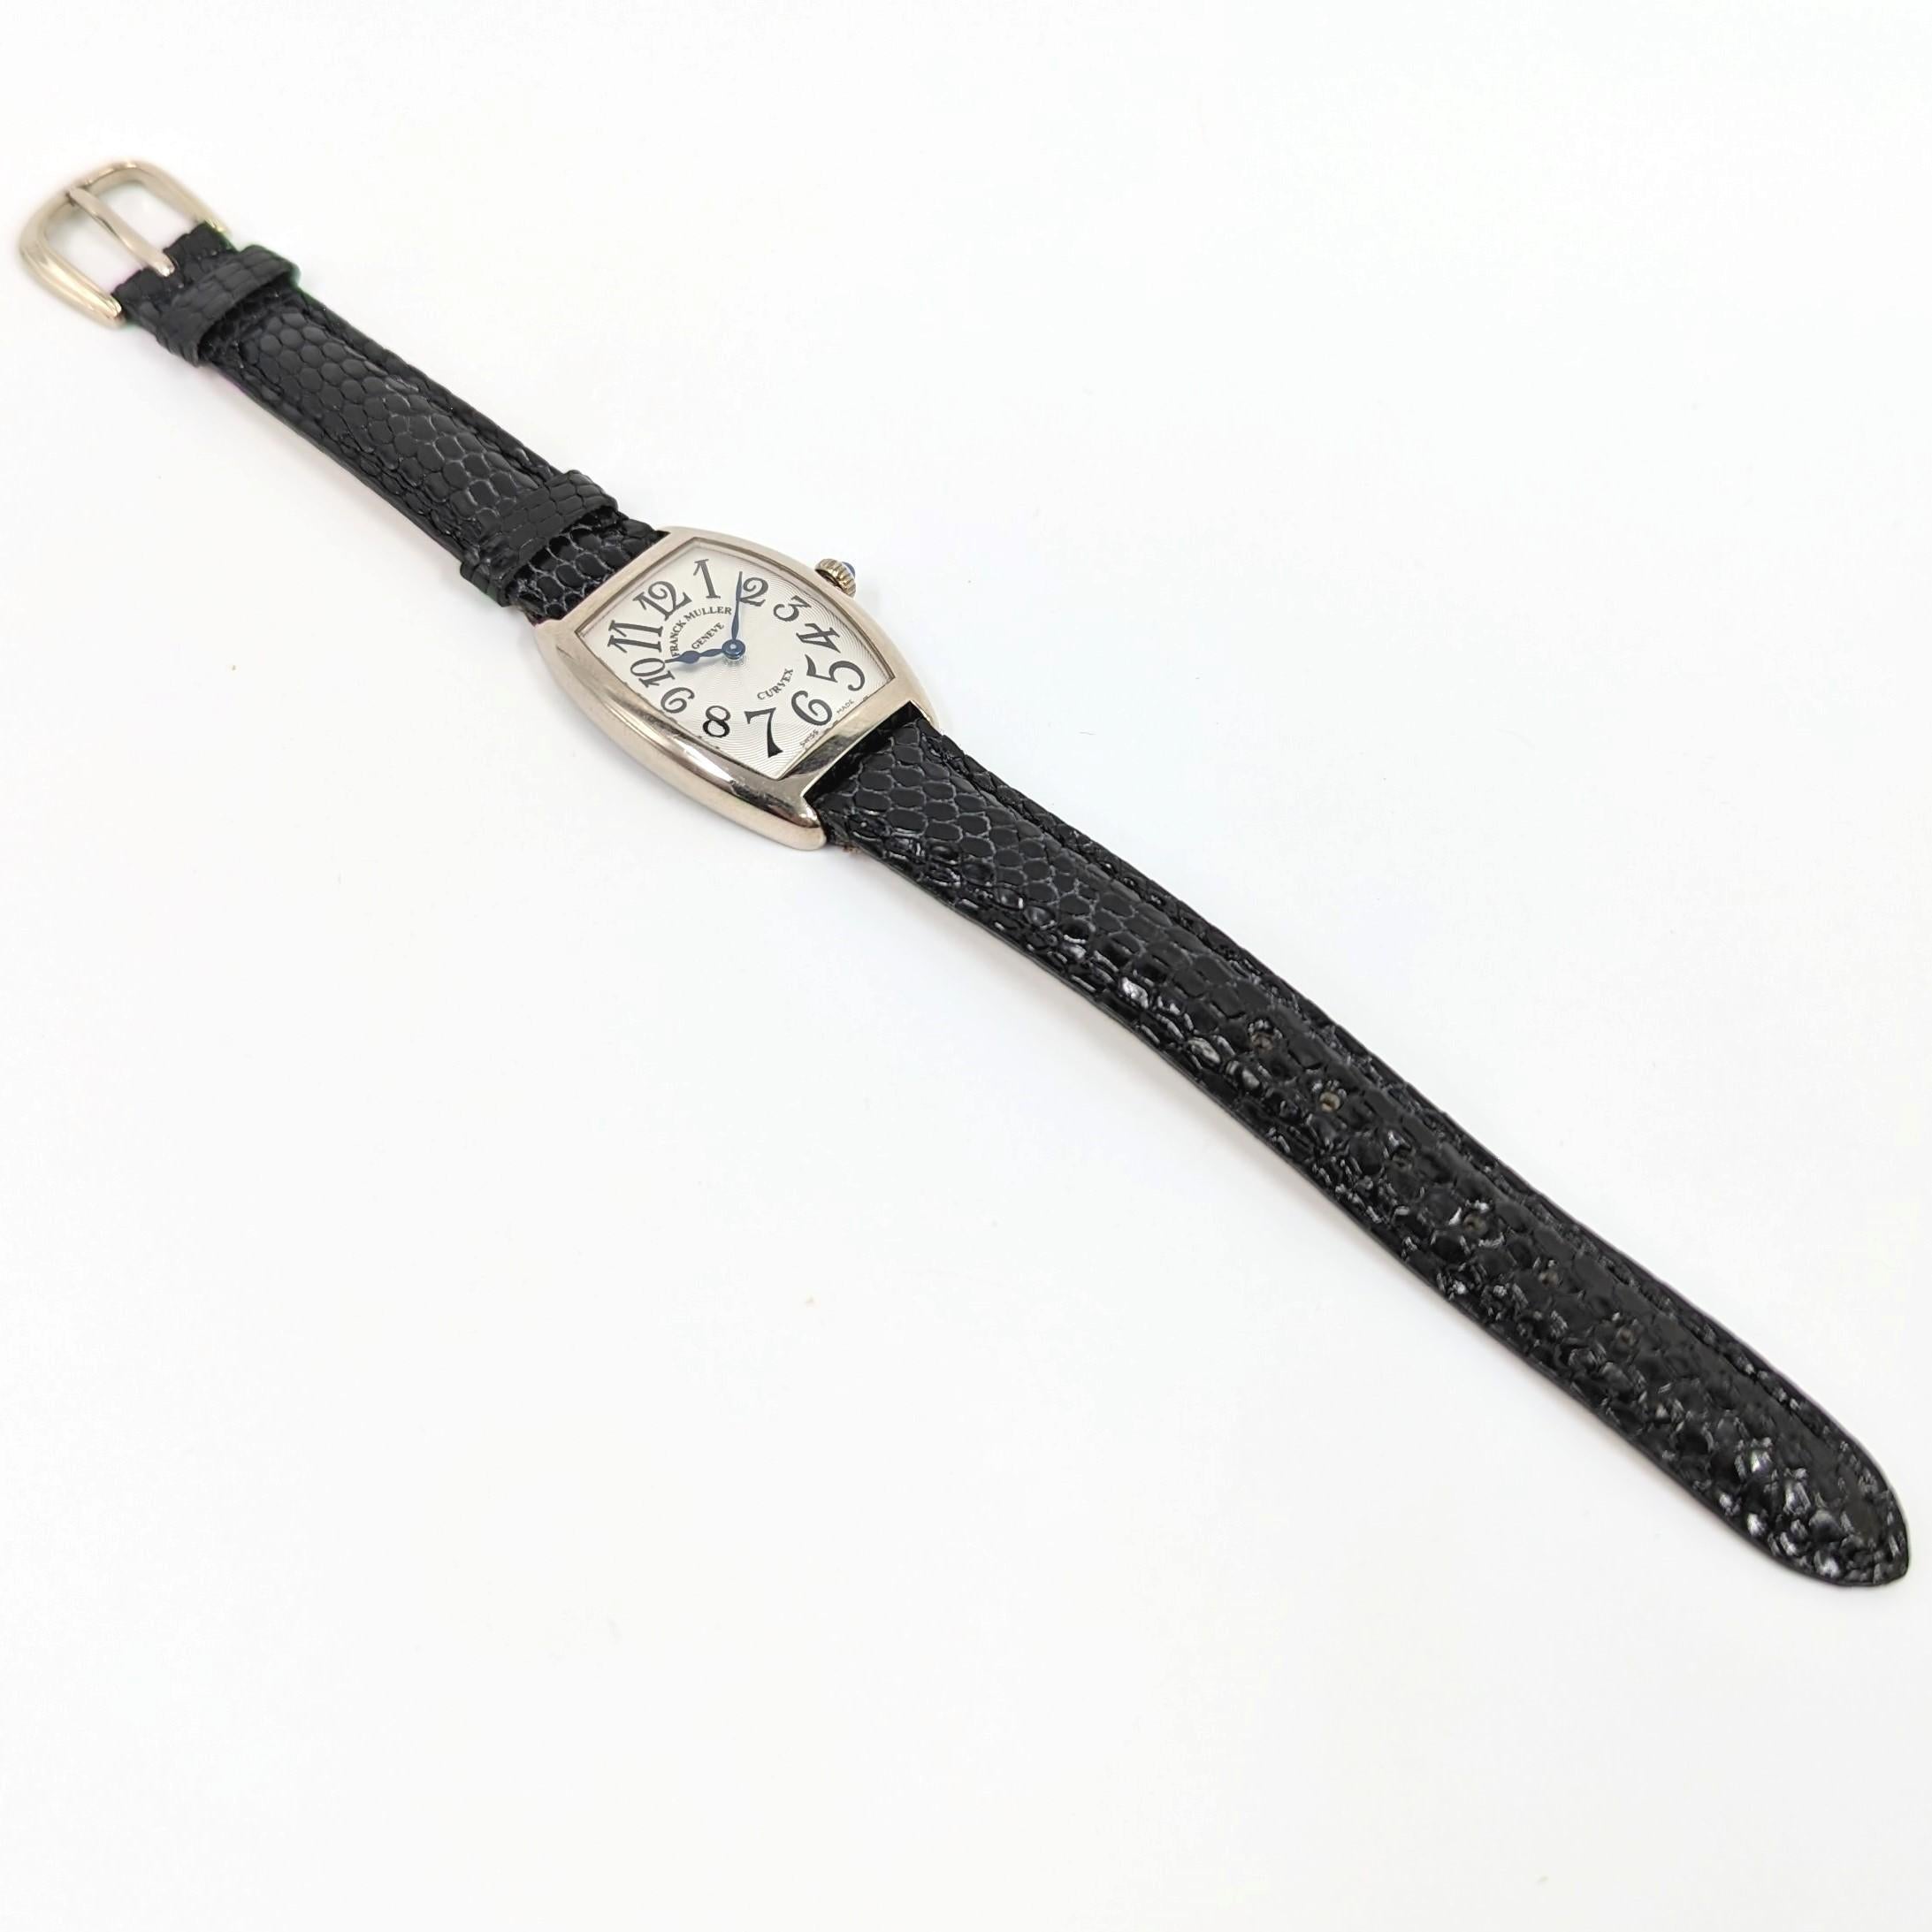 A  beautifully timeless Franck Muller Cintree Curvex ladies watch crafted in elegant solid 18k (au750) white gold, with a silvered guilloché dial, original FM 18k (au750) WG buckle and a black lizard strap 

Case back markings: FRANCK MULLER GENEVE